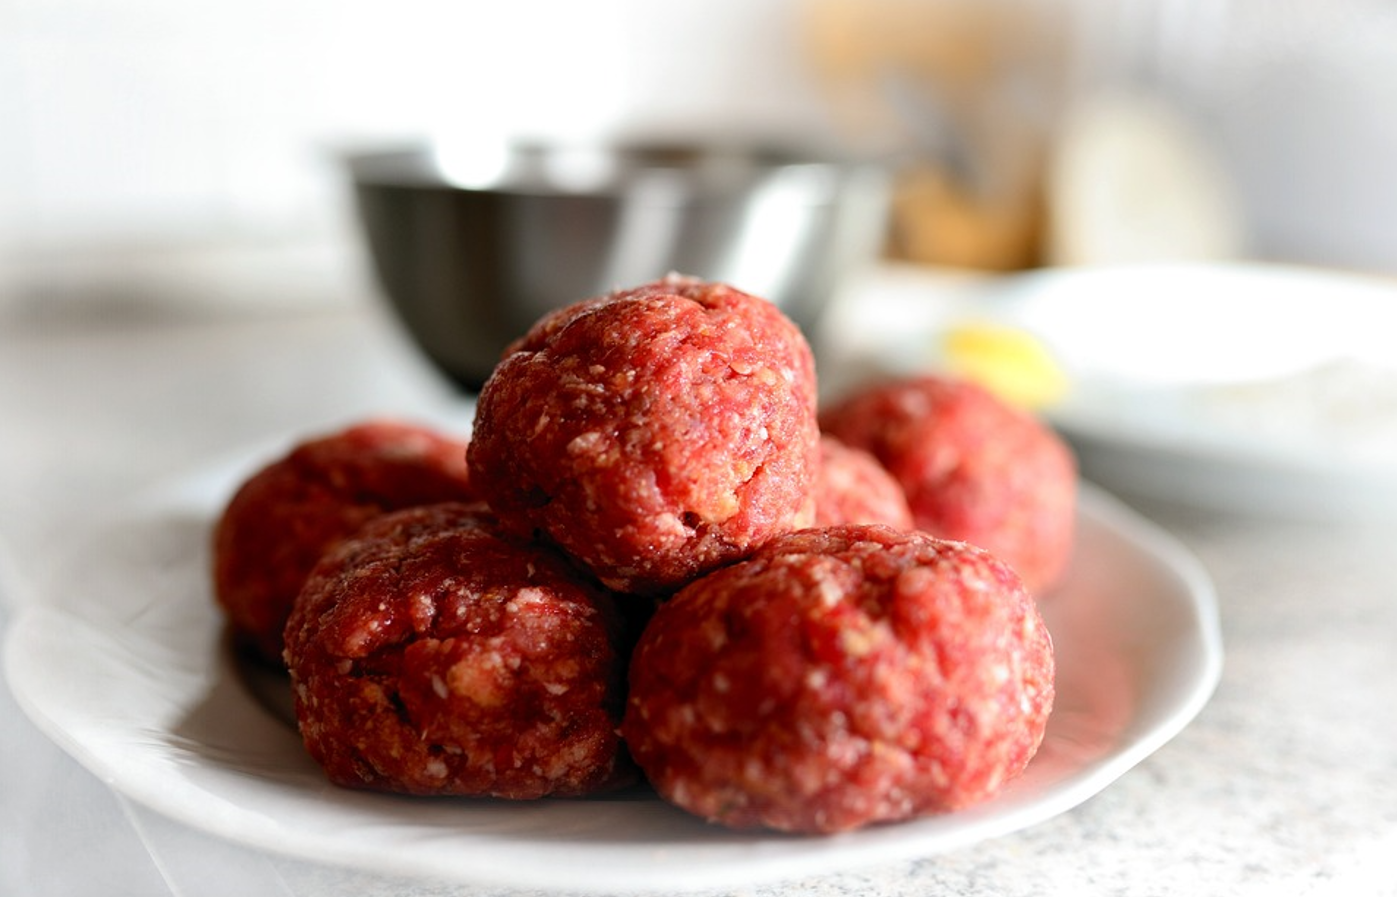 Minced meat with onions for making meatballs